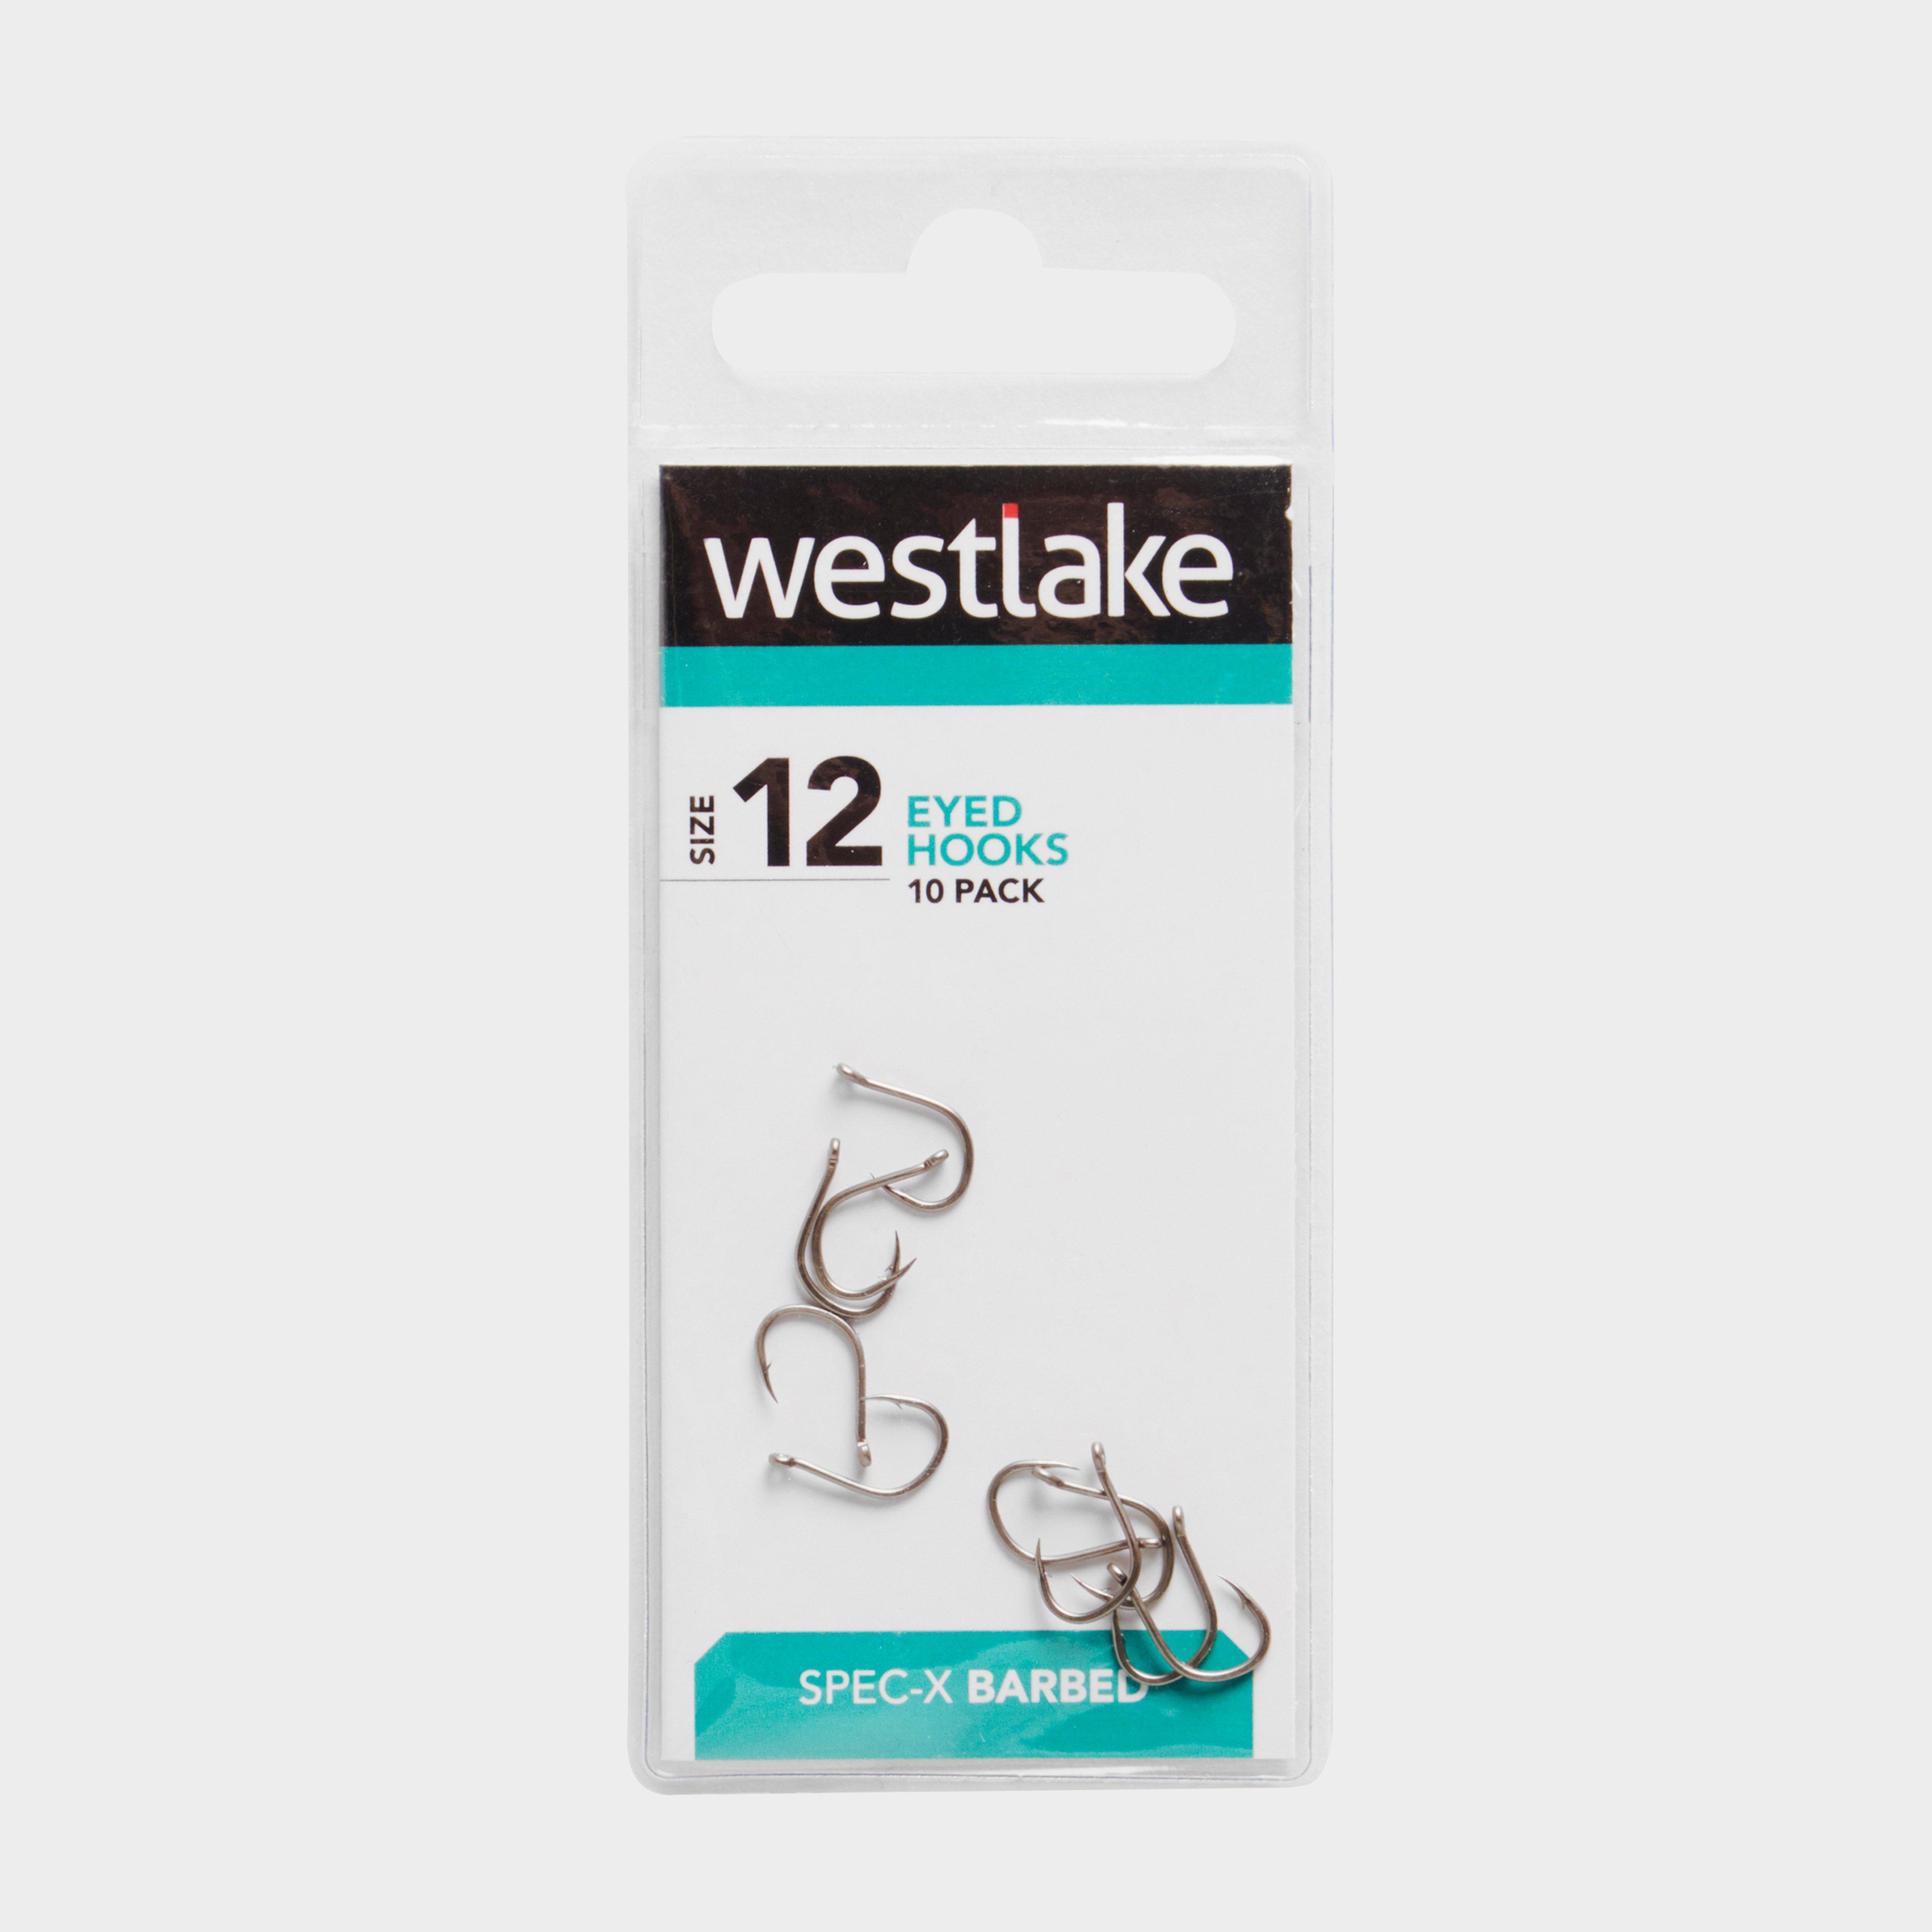 Photos - Fishing Hook / Jig Head West Lake Barbed Eyed Hooks  (Size 12), Silver (Pack of 10)